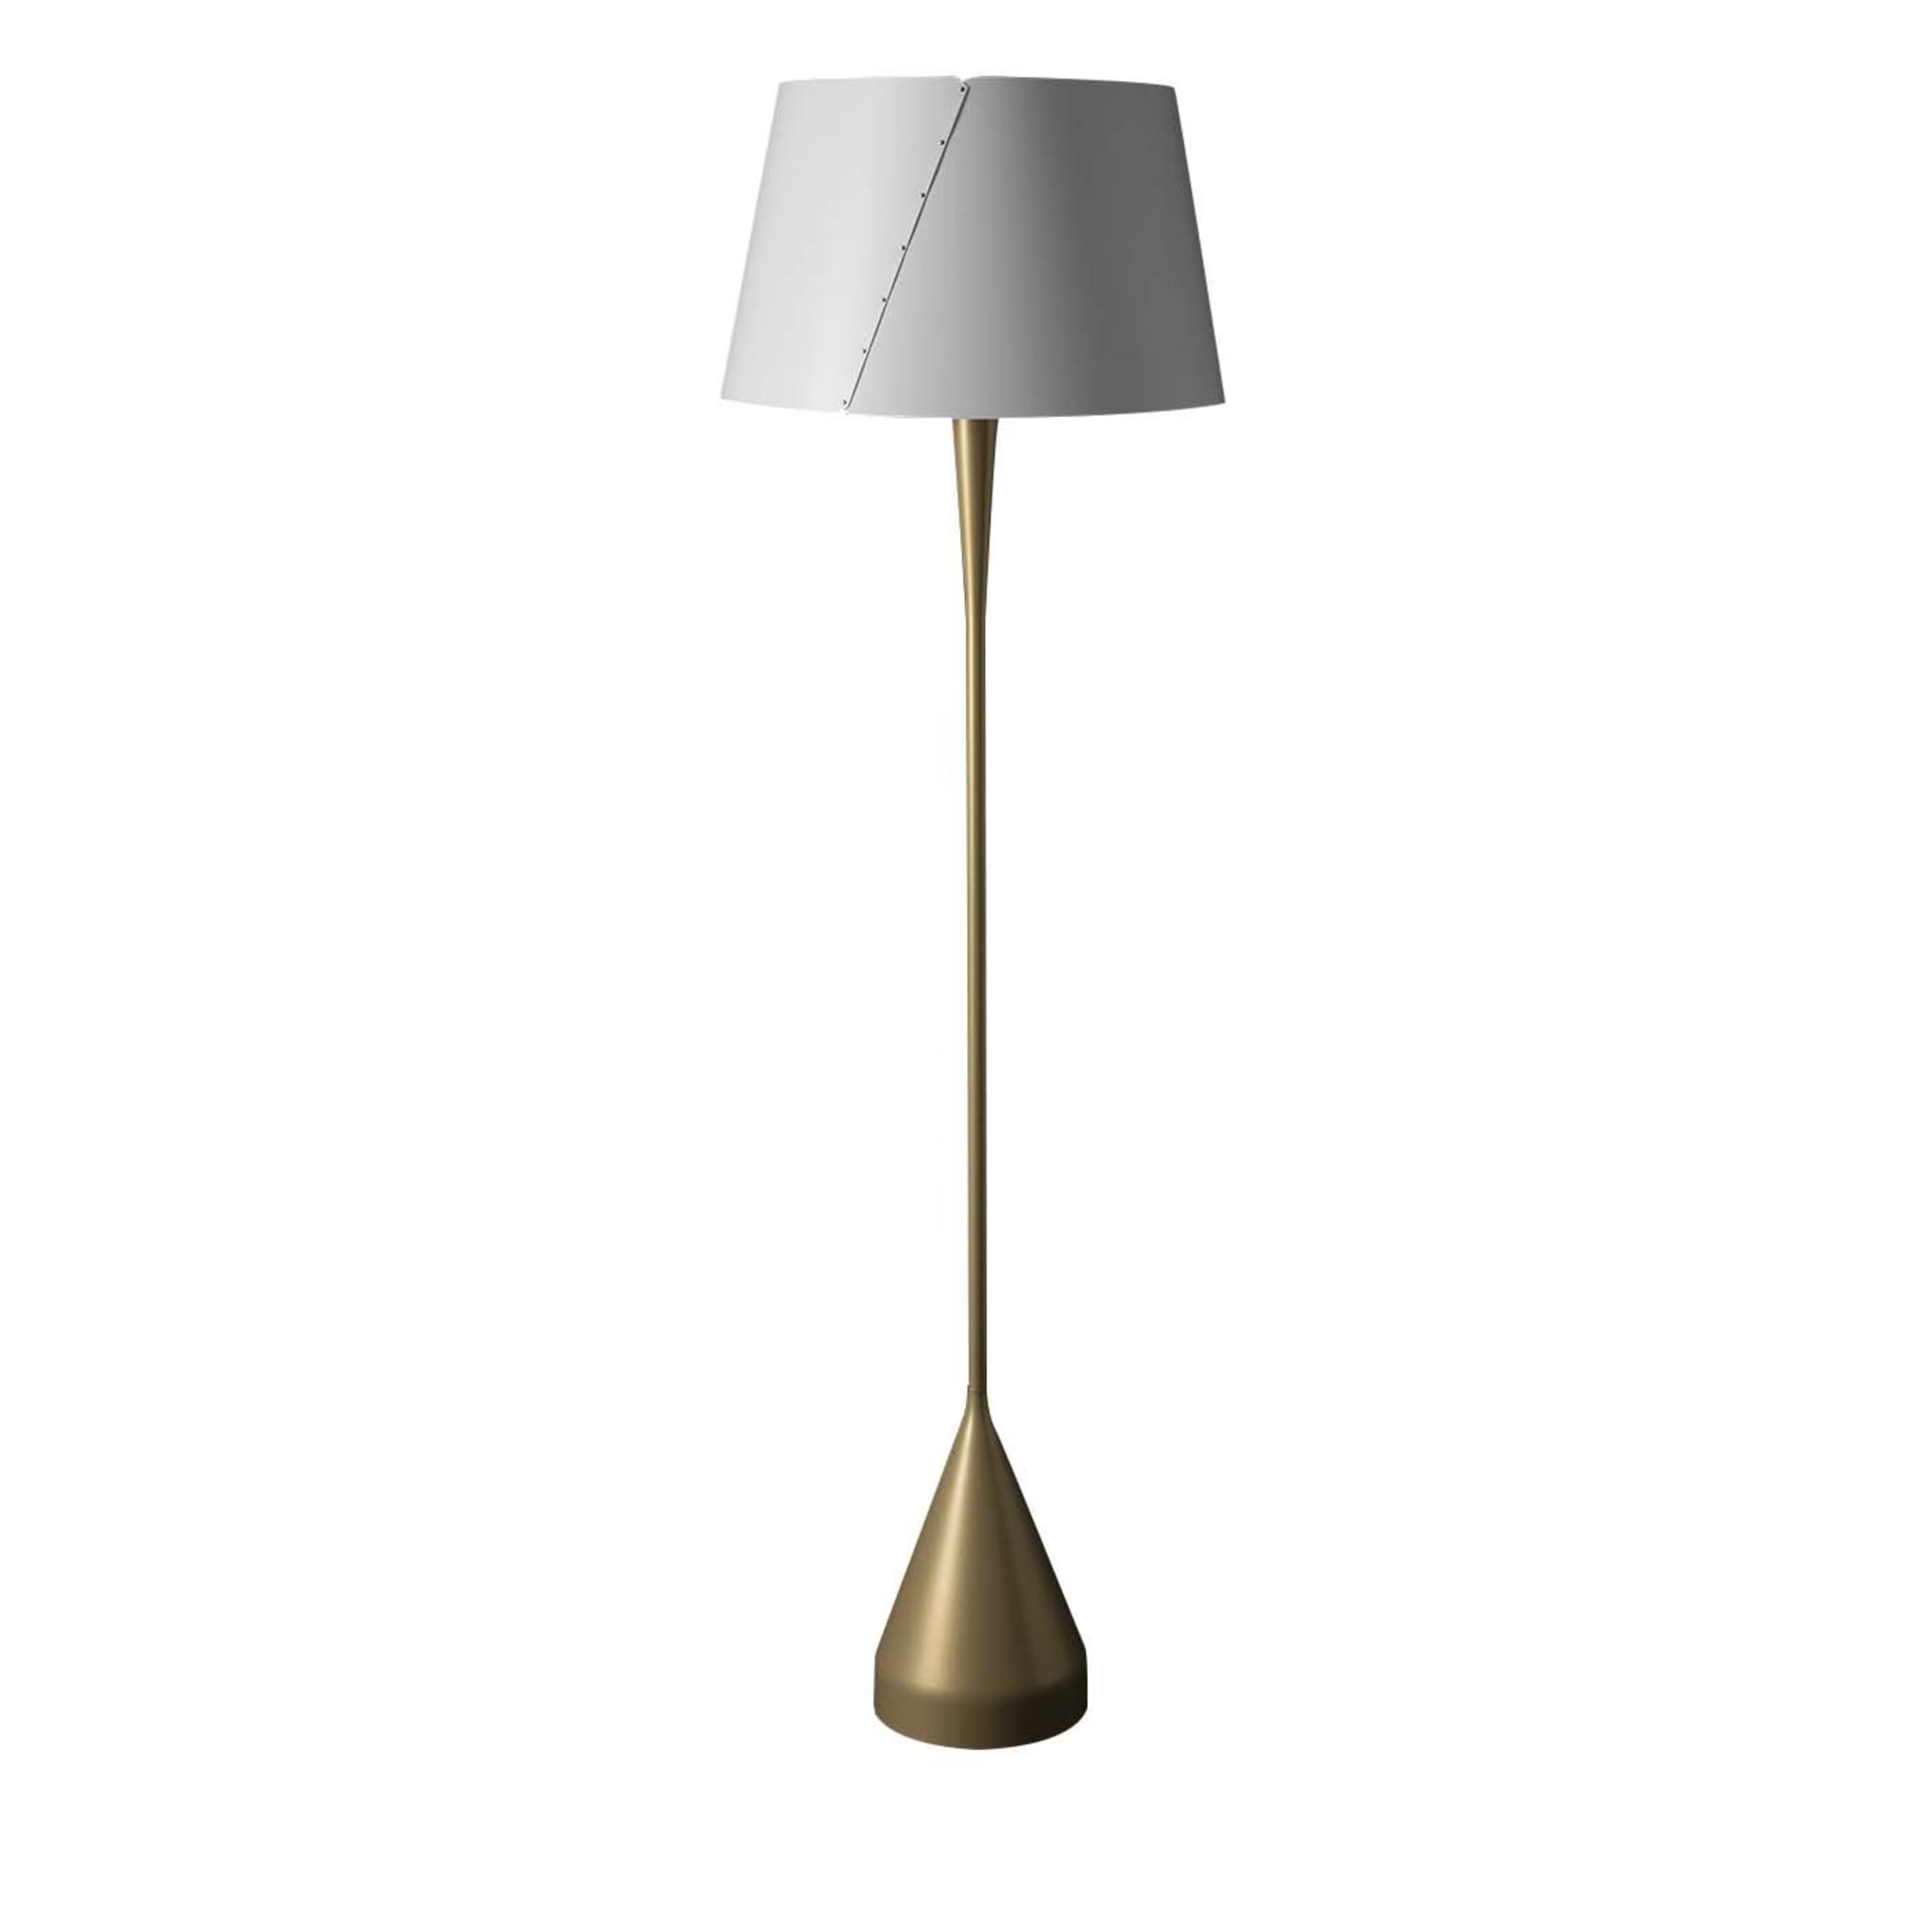 De-Lux A4 Floor Lamp by Gio Ponti - Main view